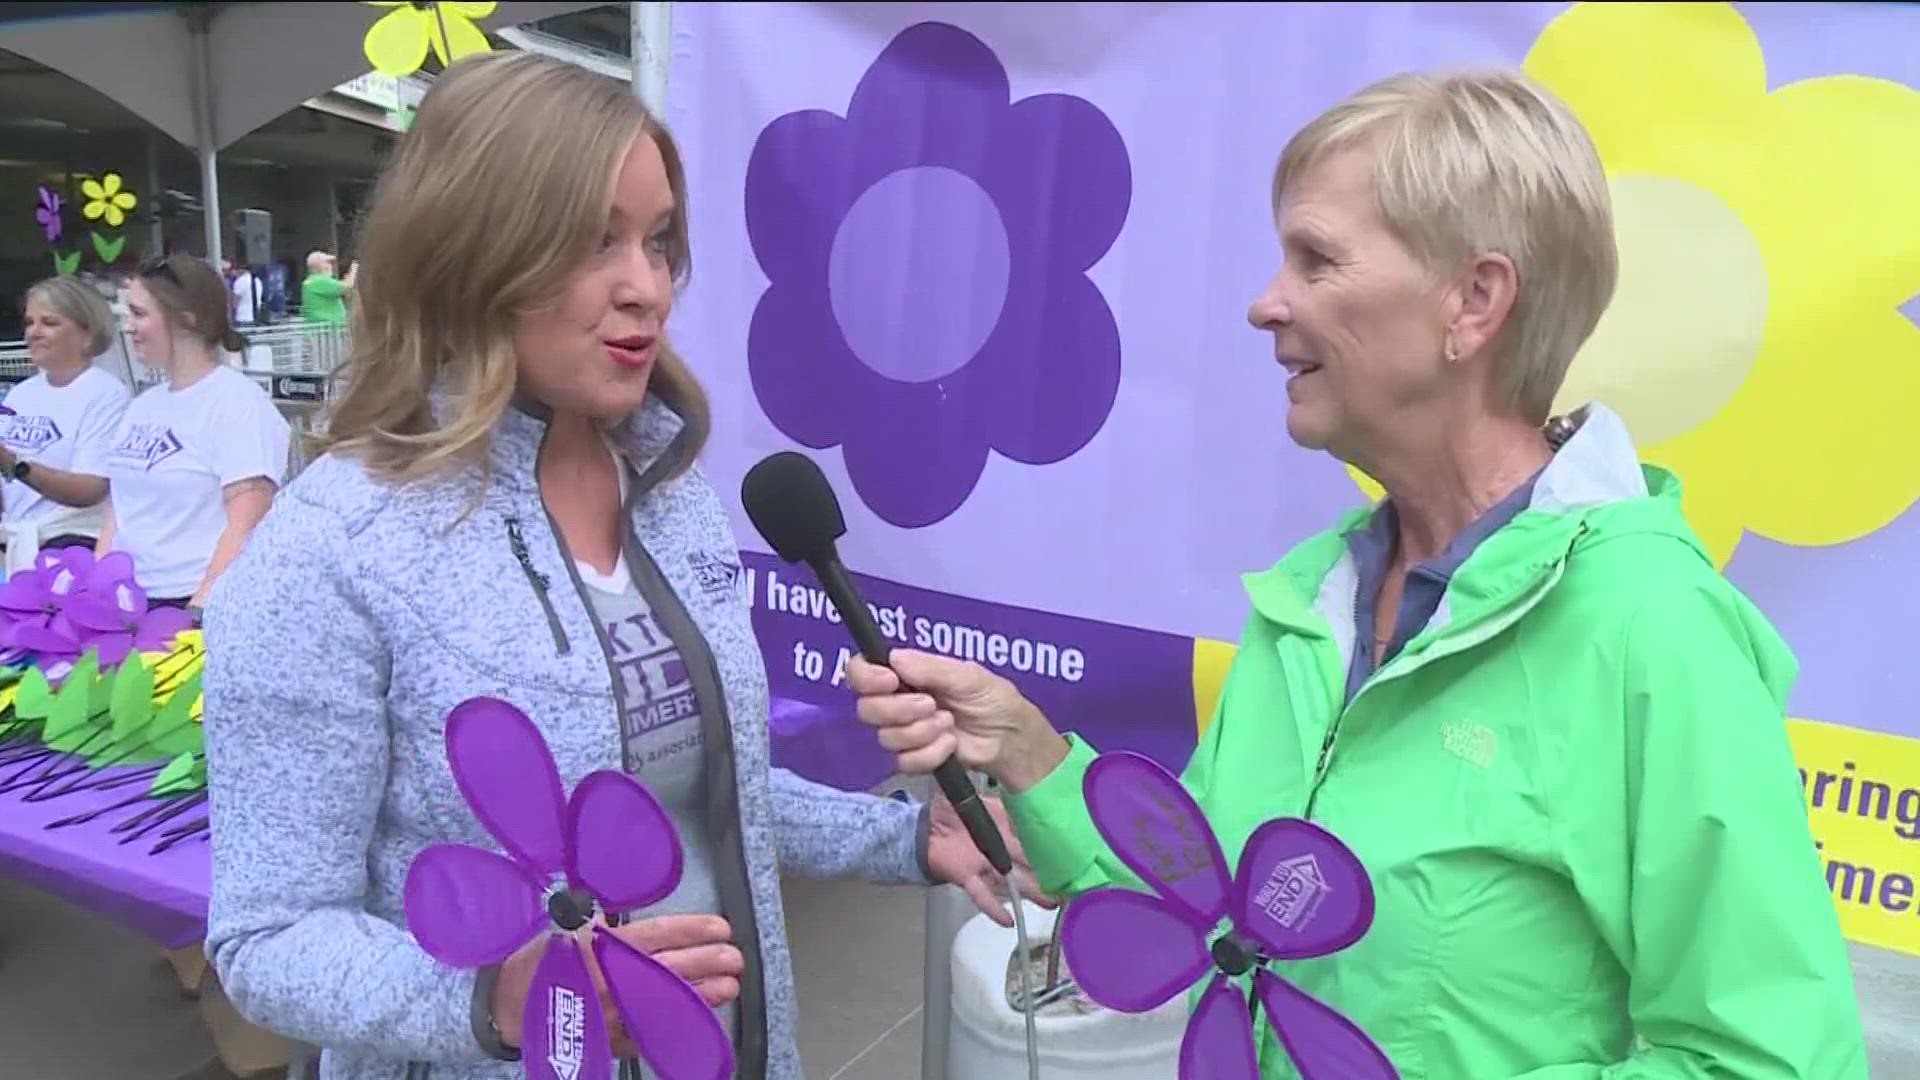 The walk is the largest Alzheimer's walk in the country and aims to raise $1.4 million for the Alzheimer's Association.